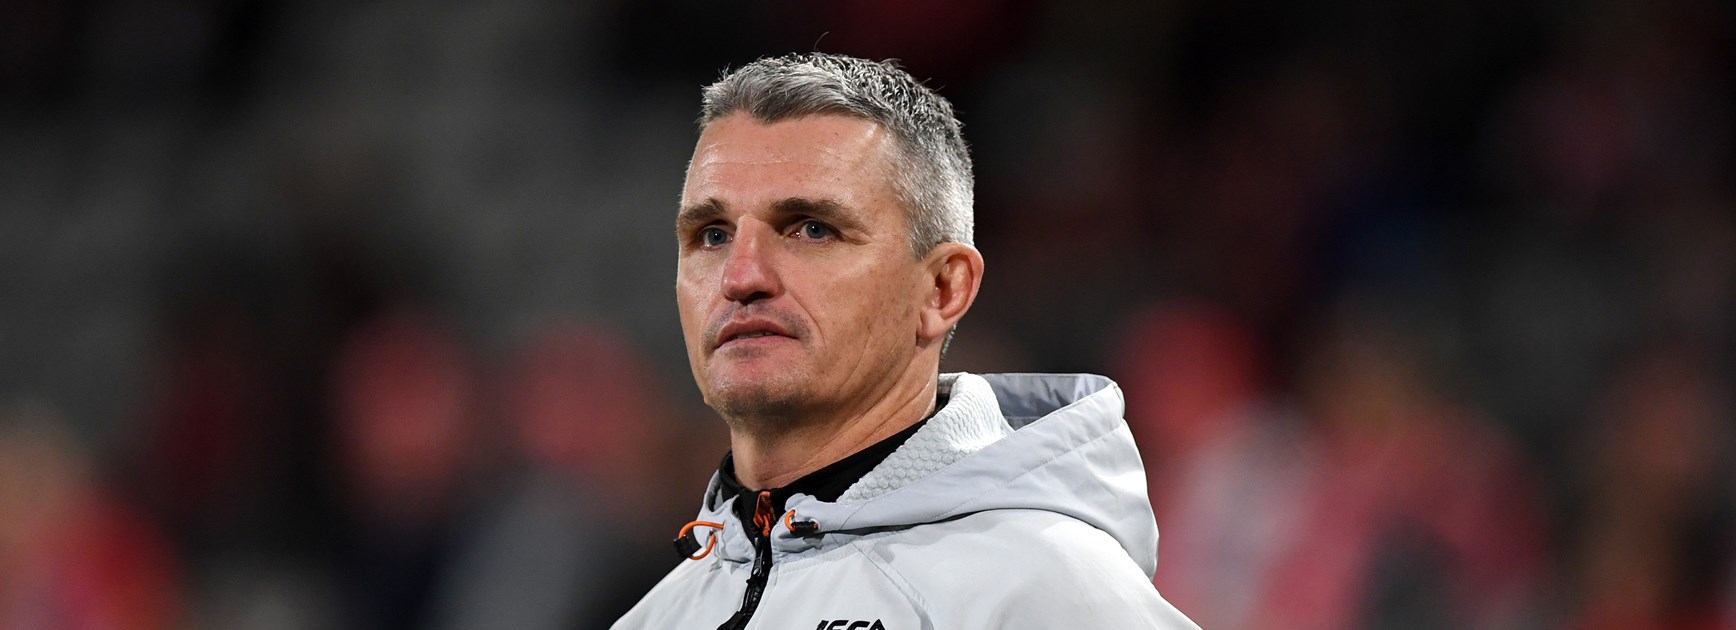 Ivan Cleary.